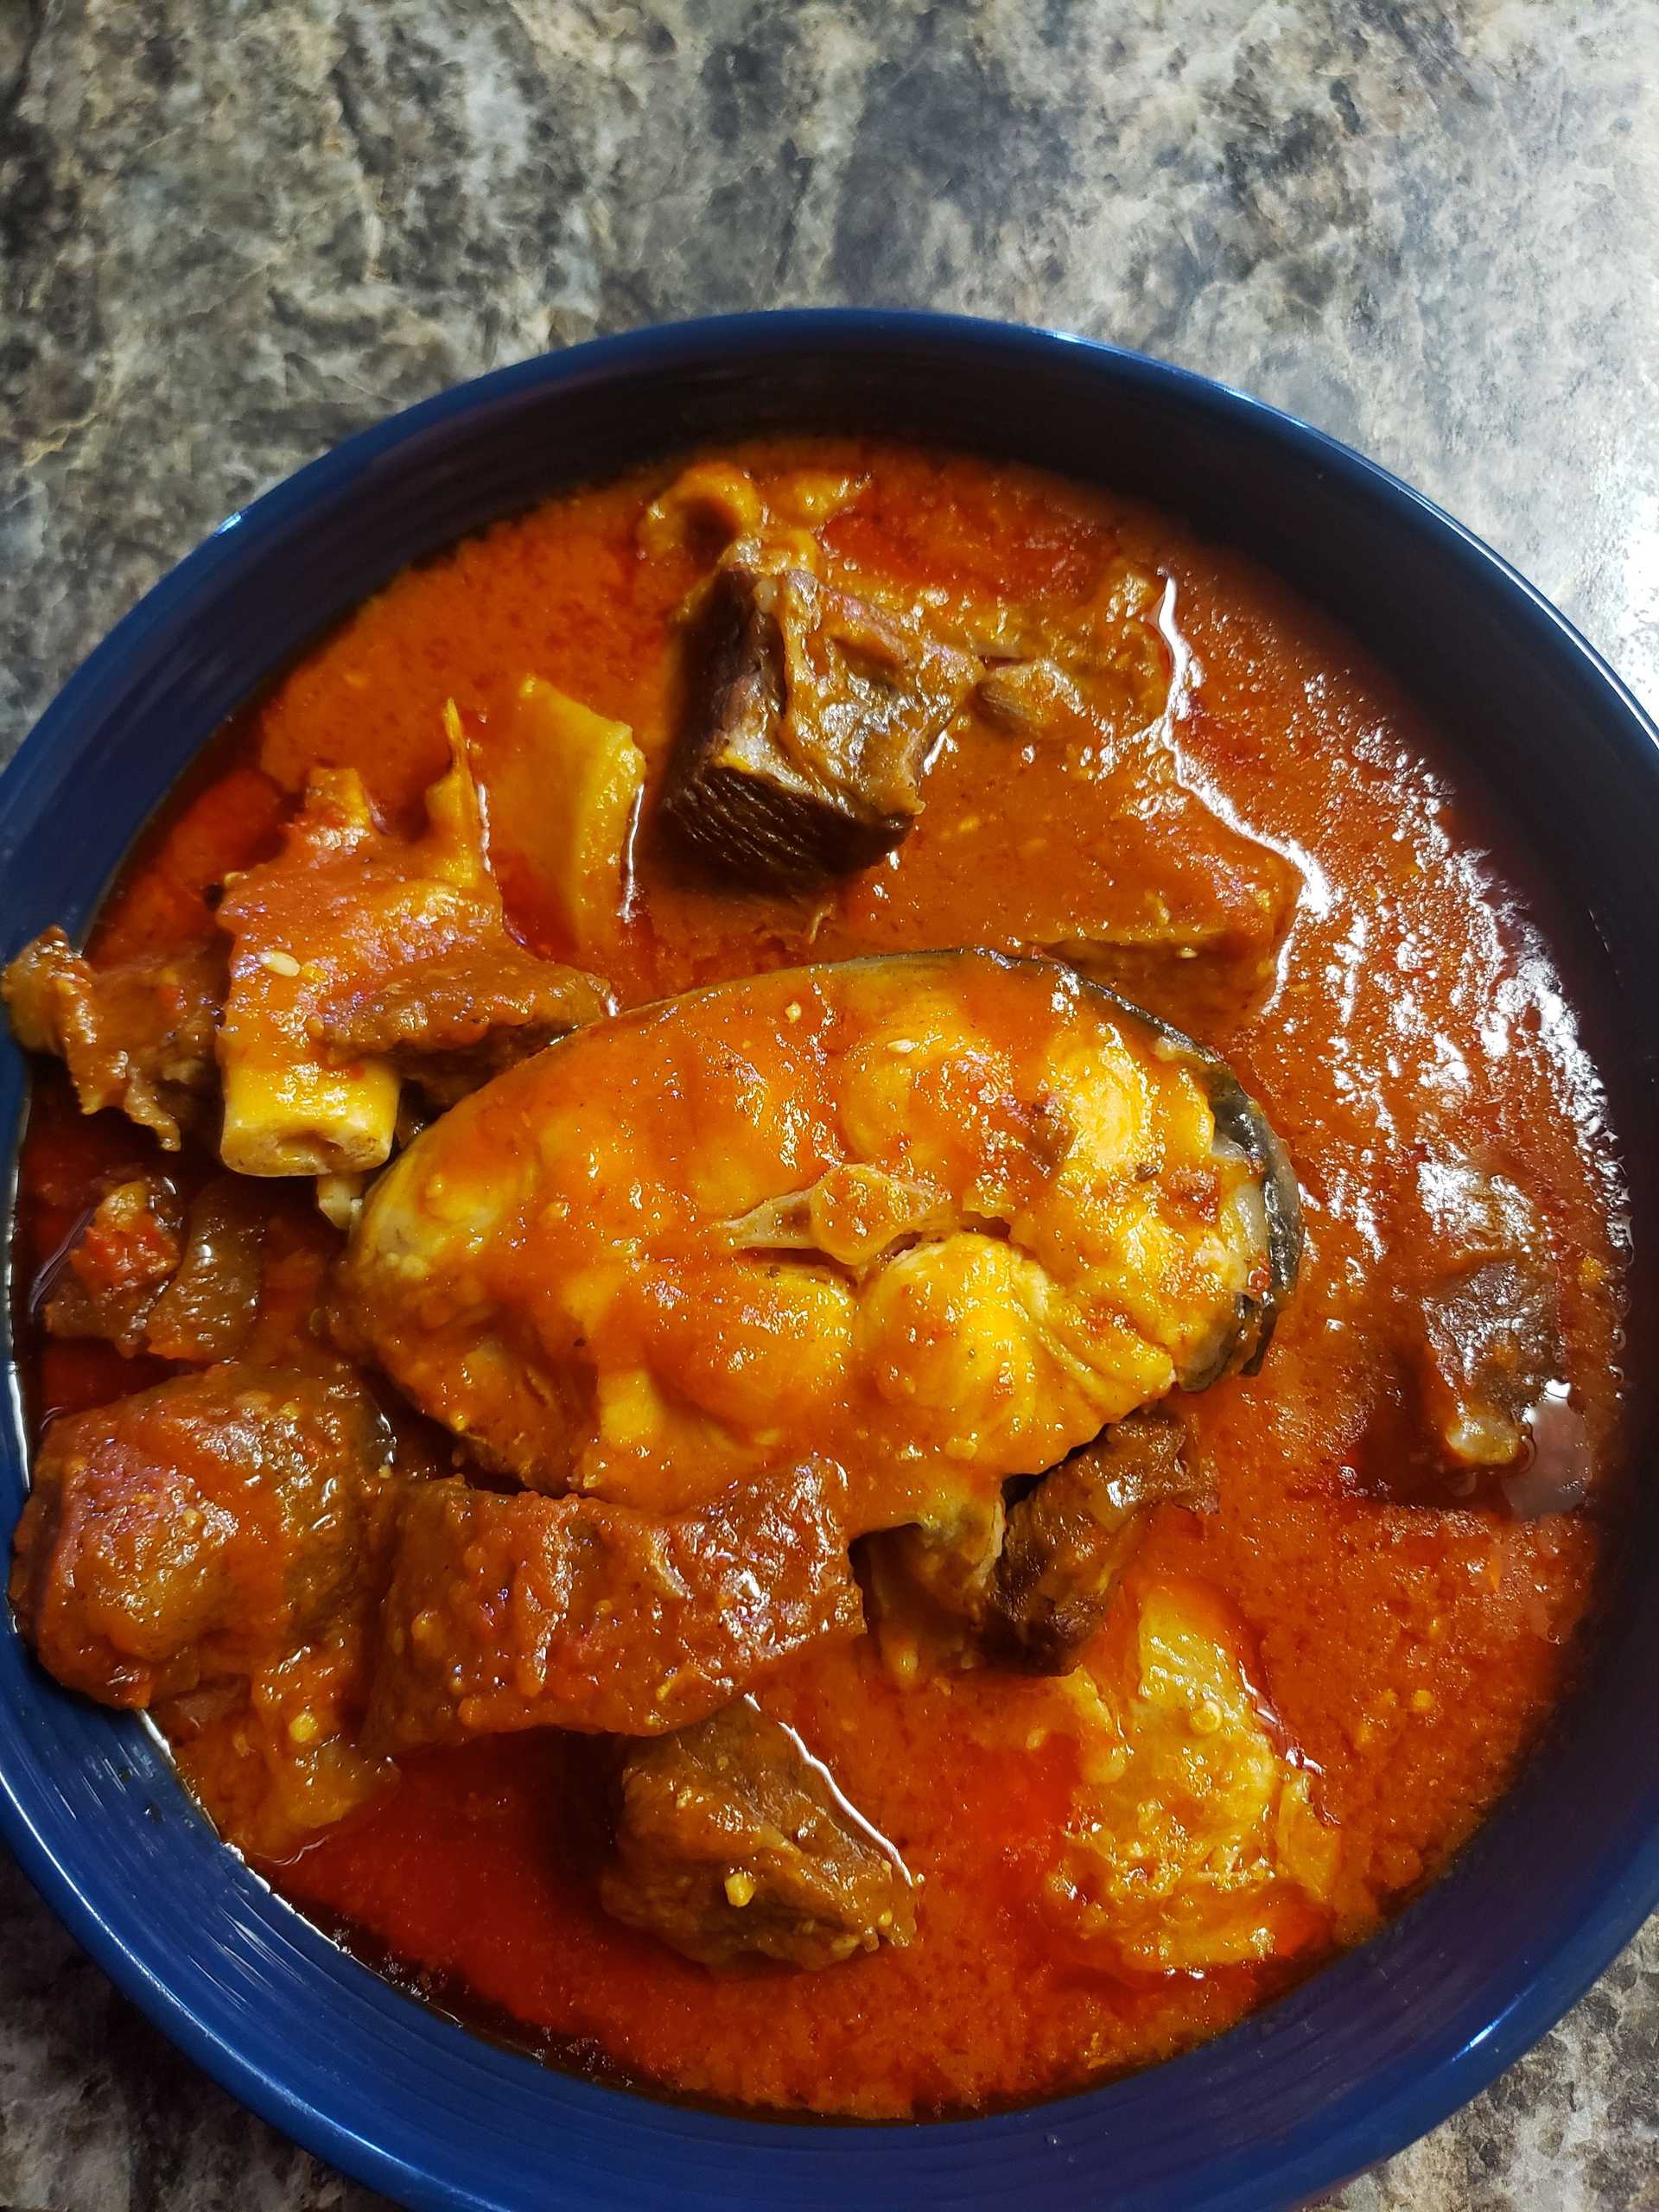 Bowl of spicy stew with meat and seafood on a countertop.